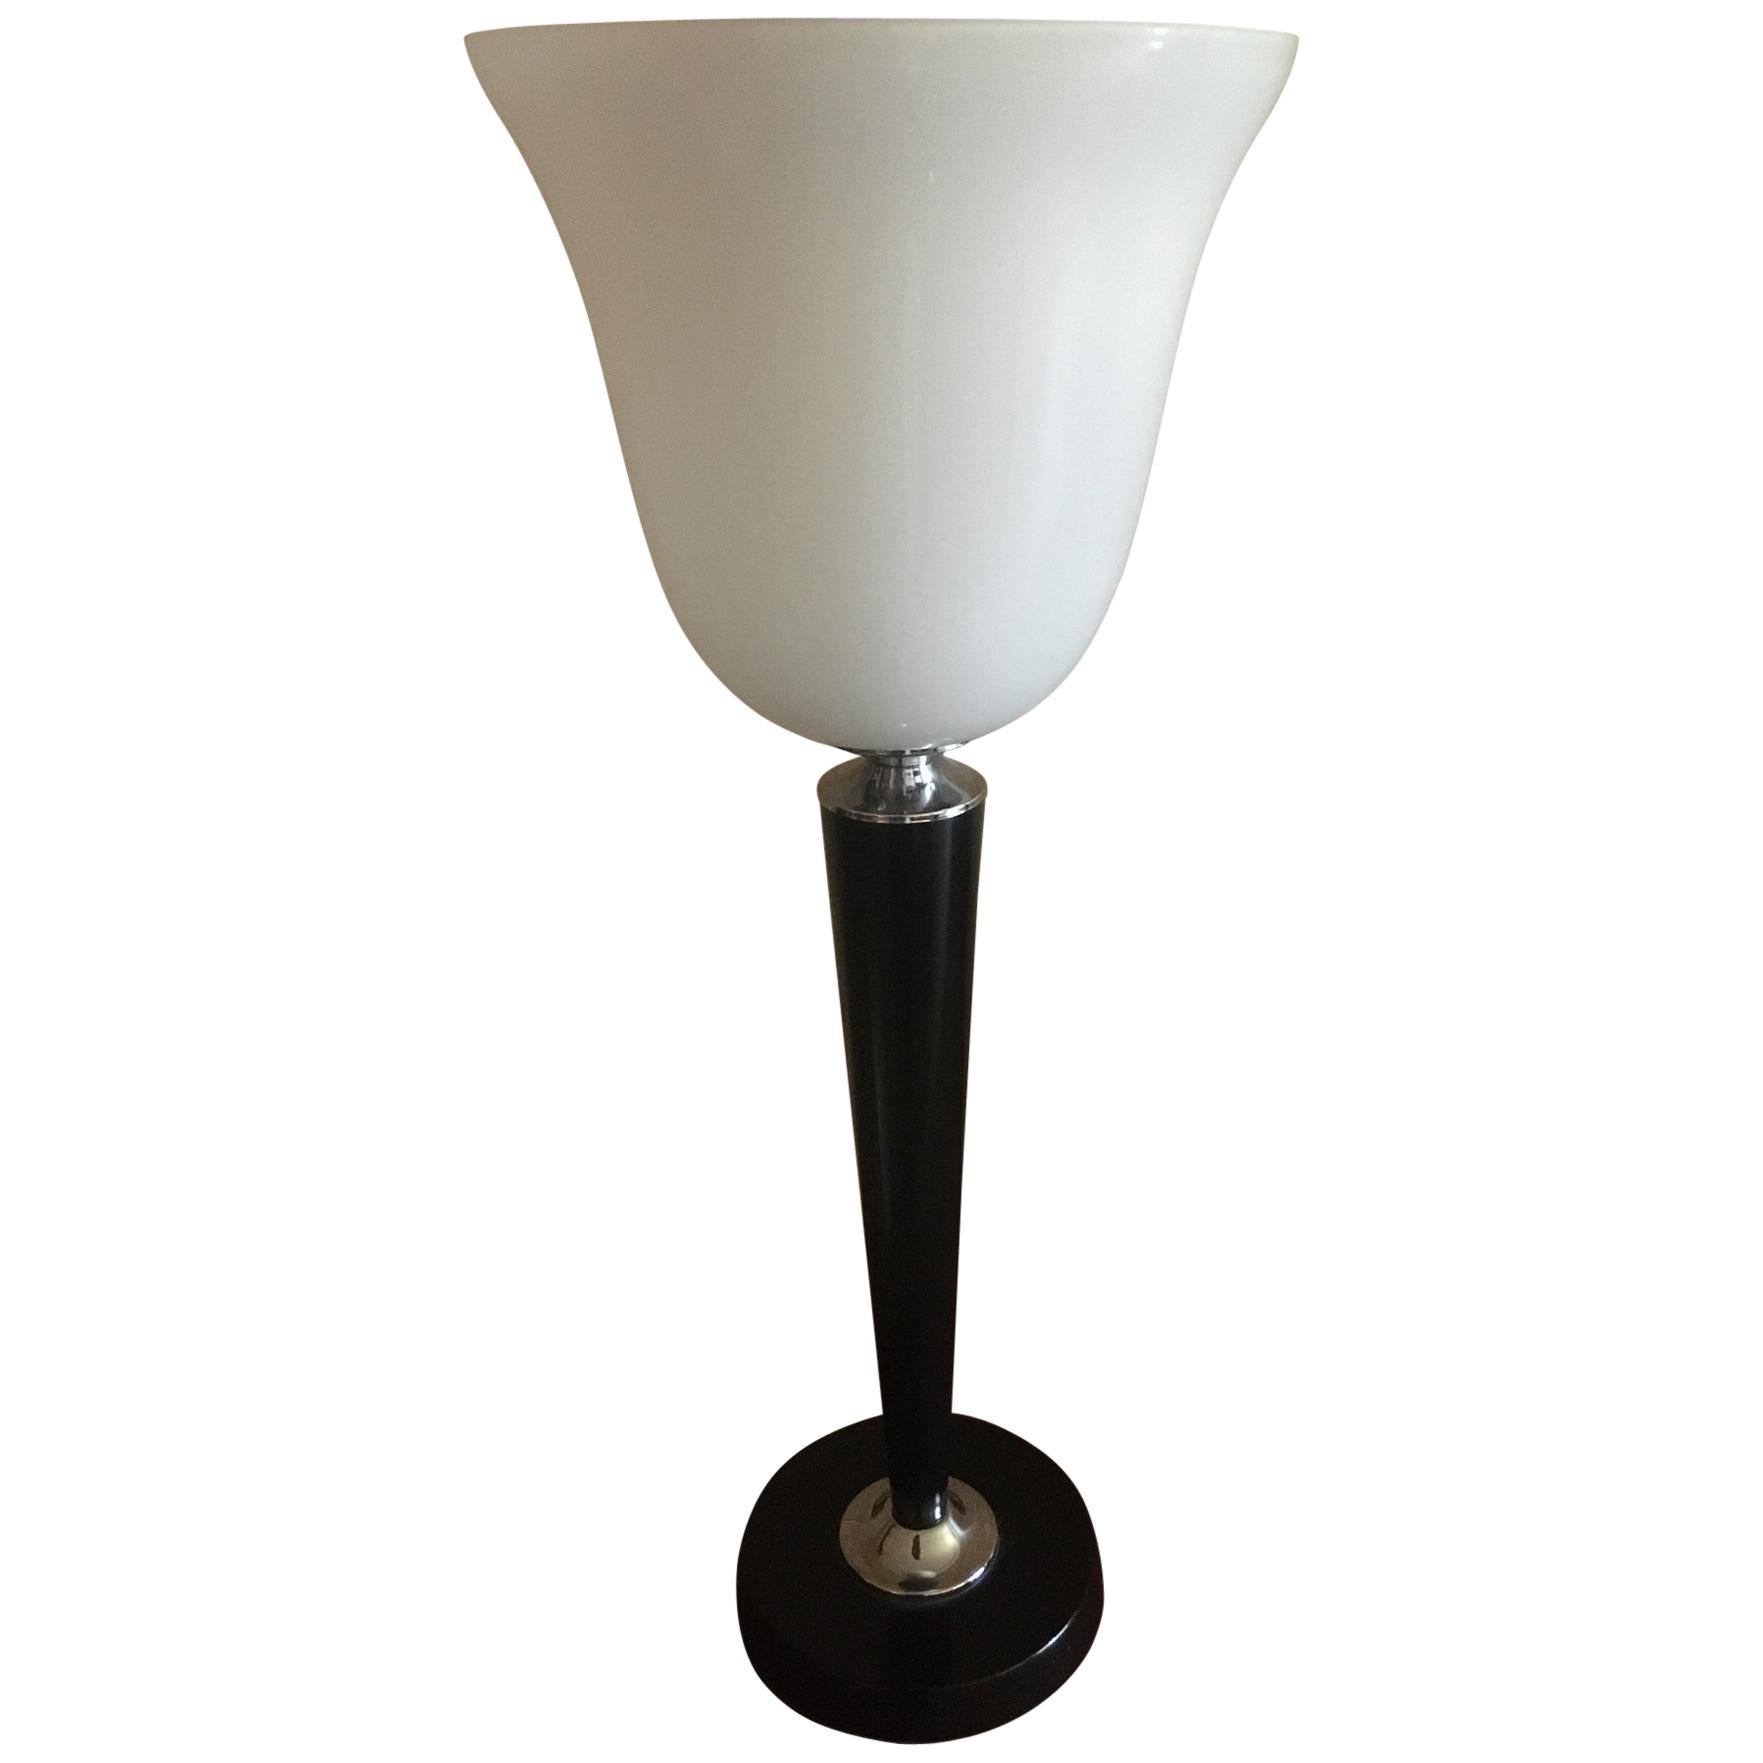 French 1920s Art Deco Style Black Lacquered Wooden and White Opaline Table Lamp For Sale